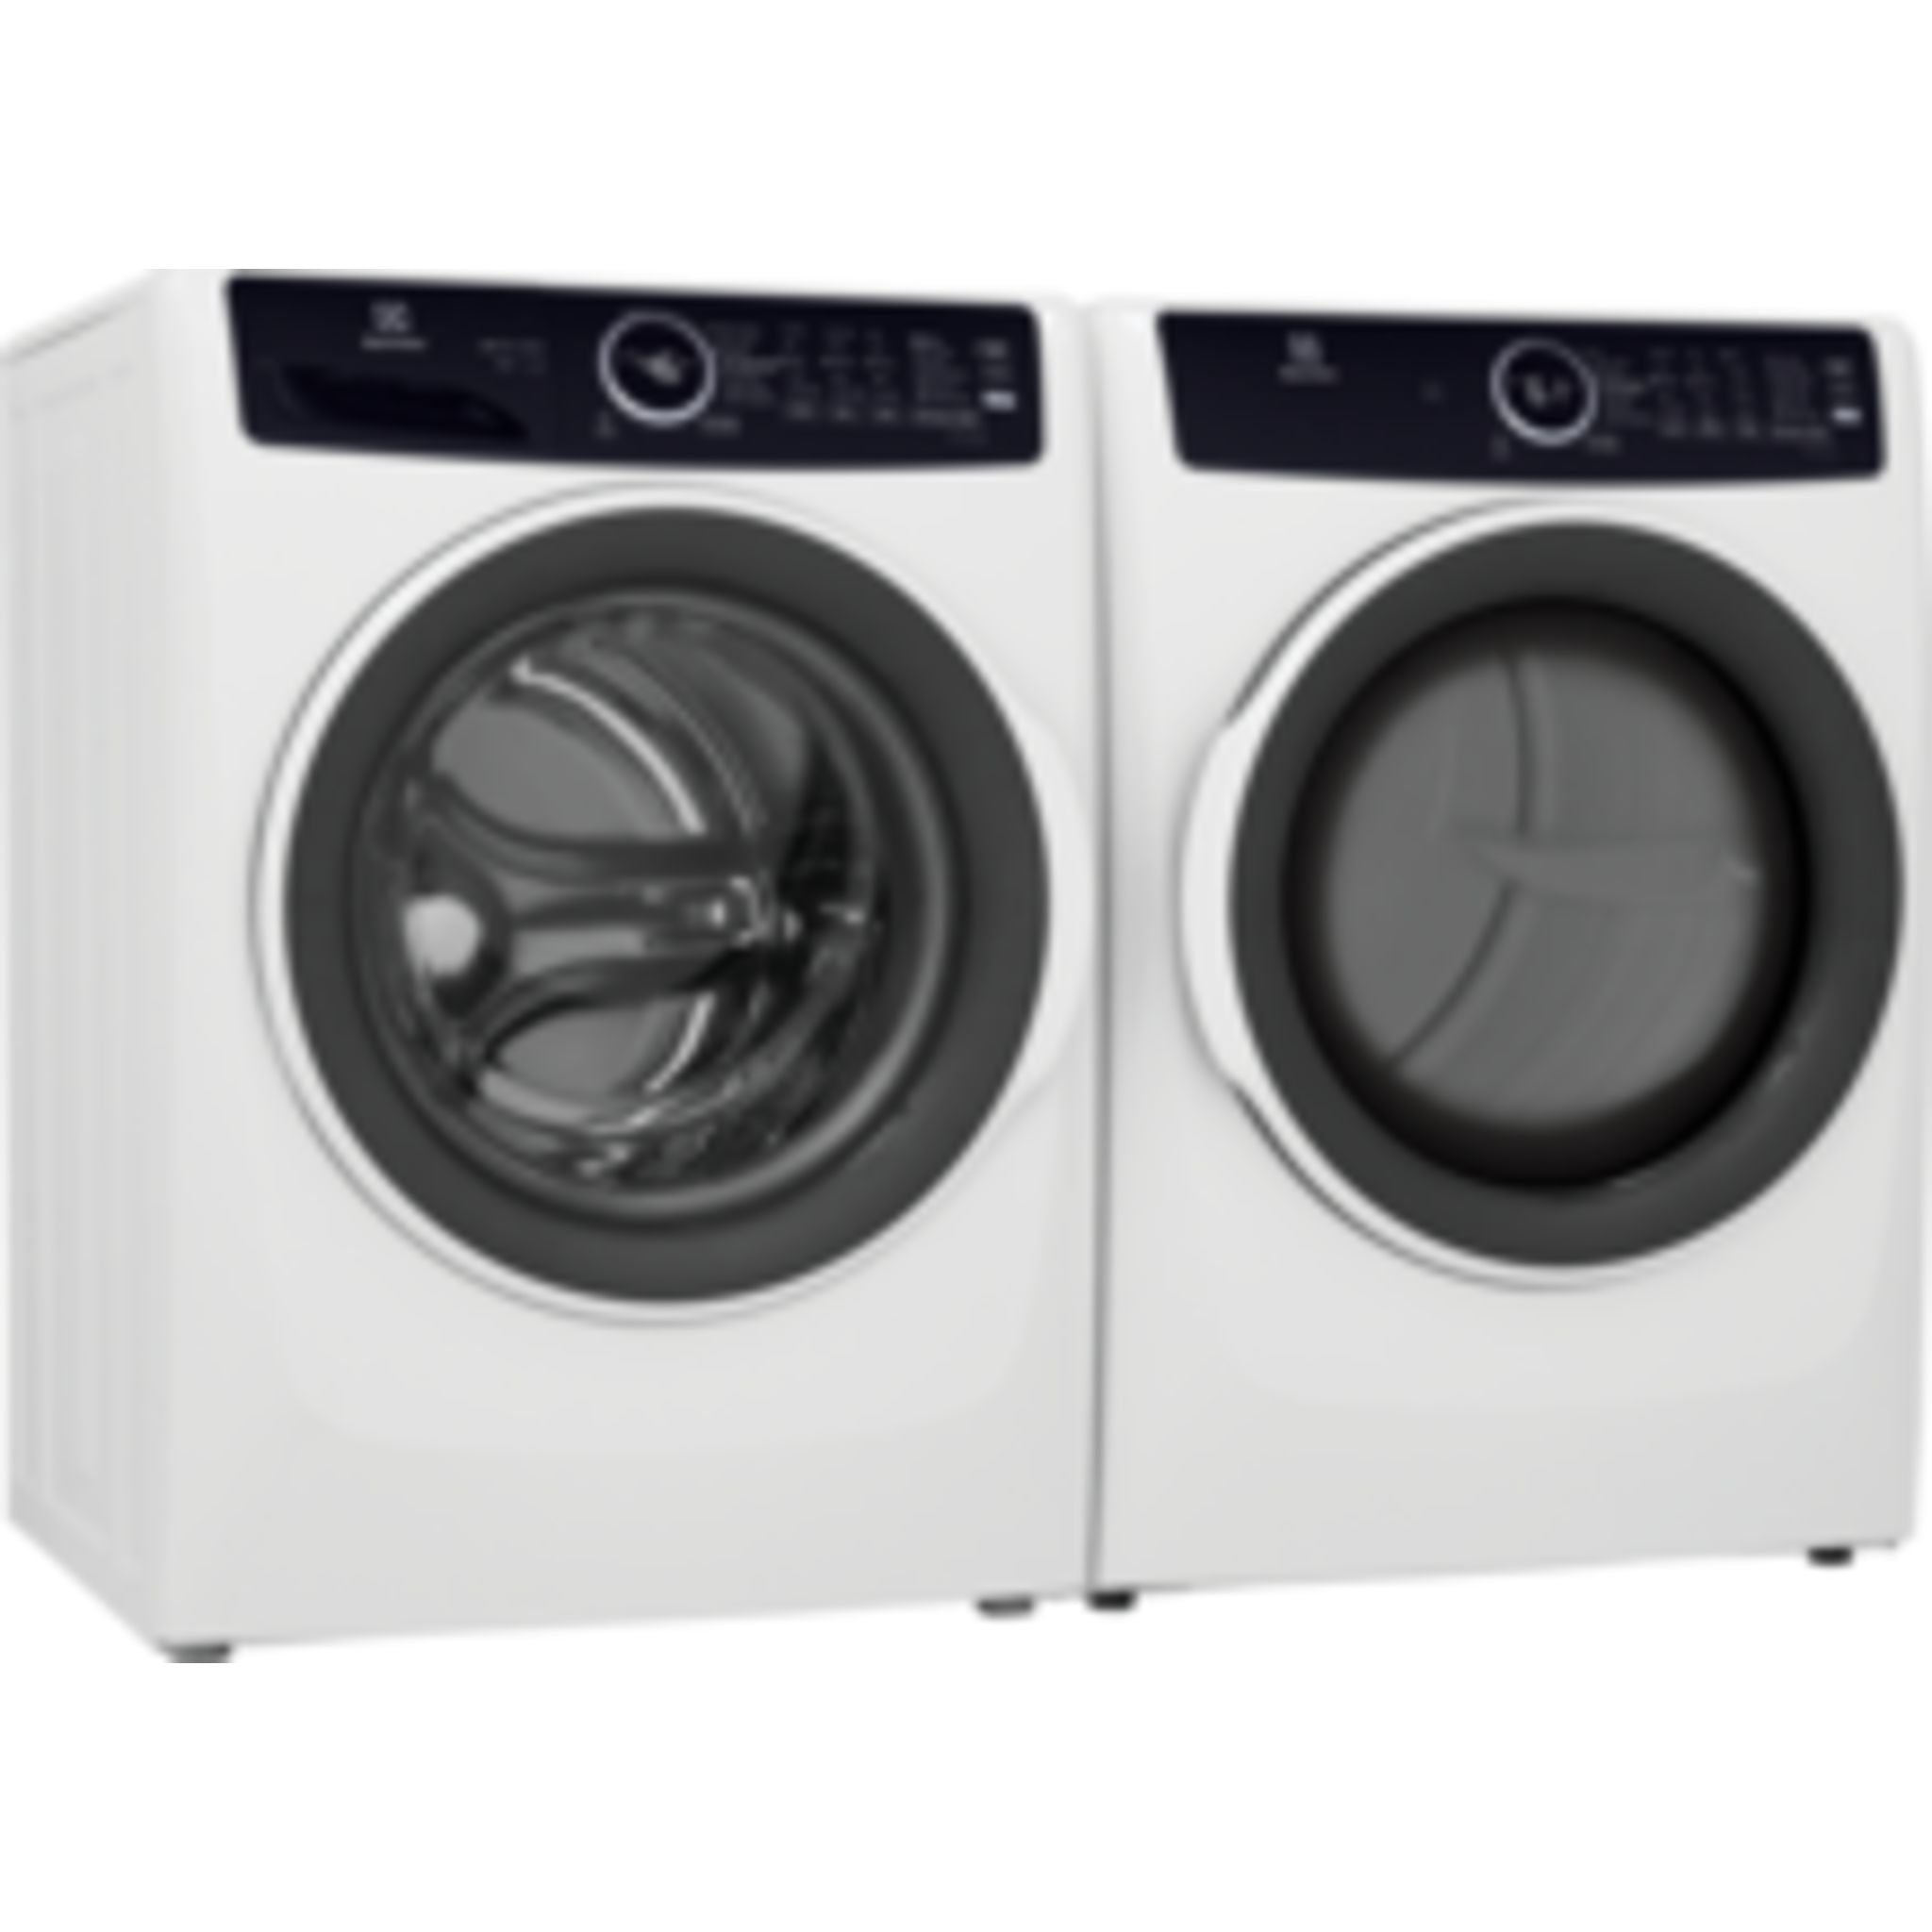 Electrolux Home Products, Electrolux Front Load Pair (1554081K) - White